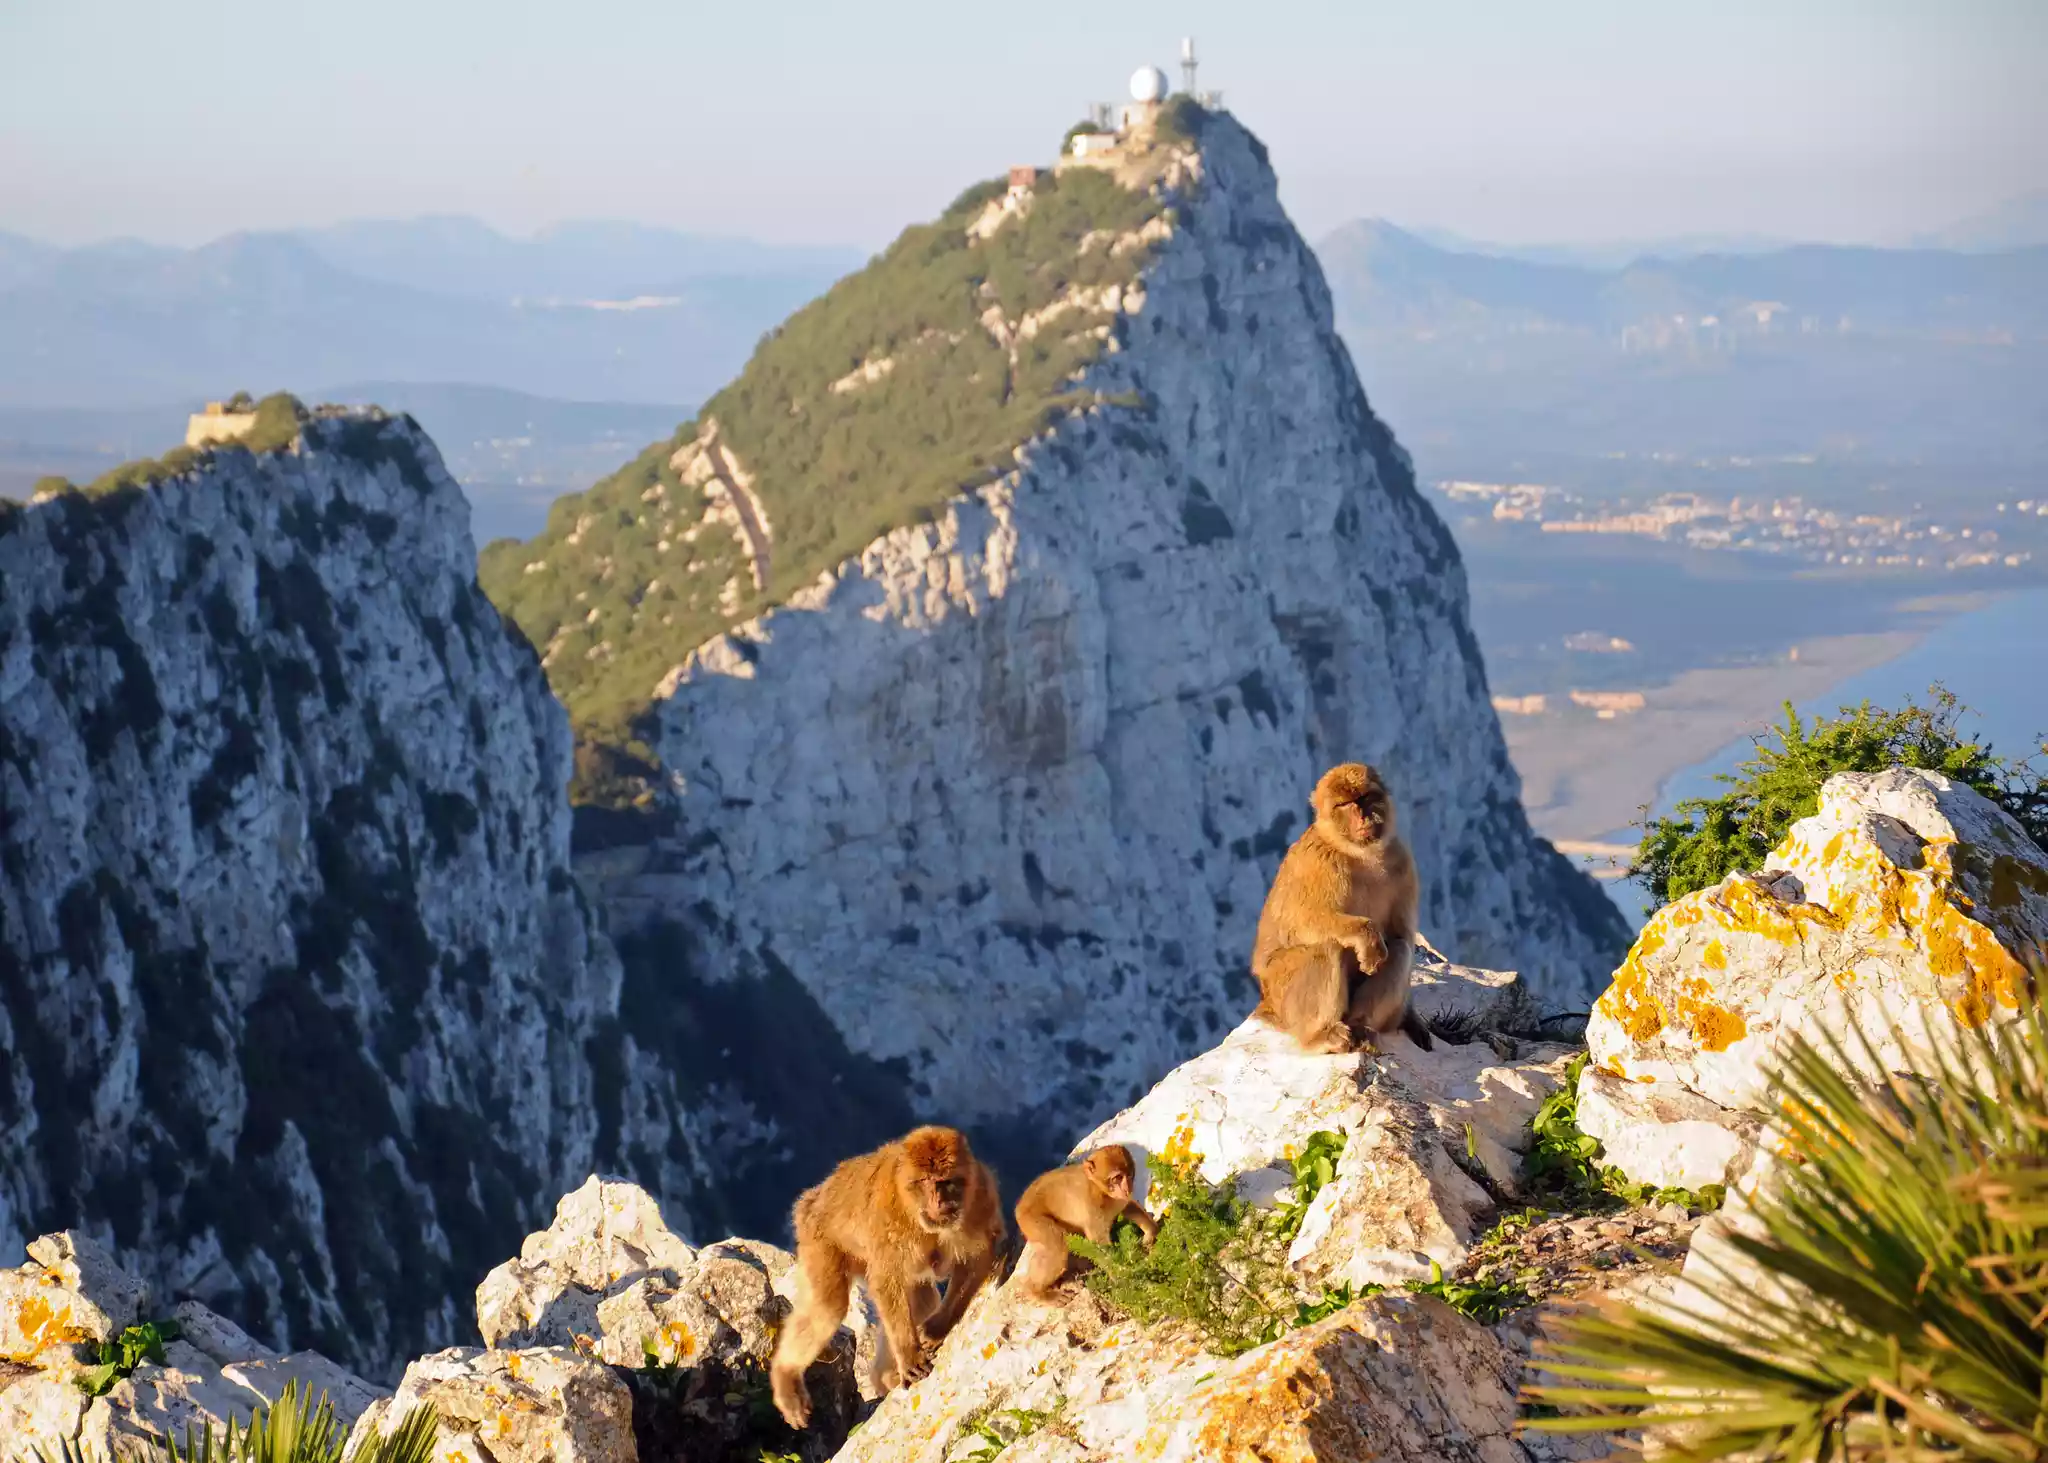 A band of monkeys sits on a rocky summit with a mountain peak in the background